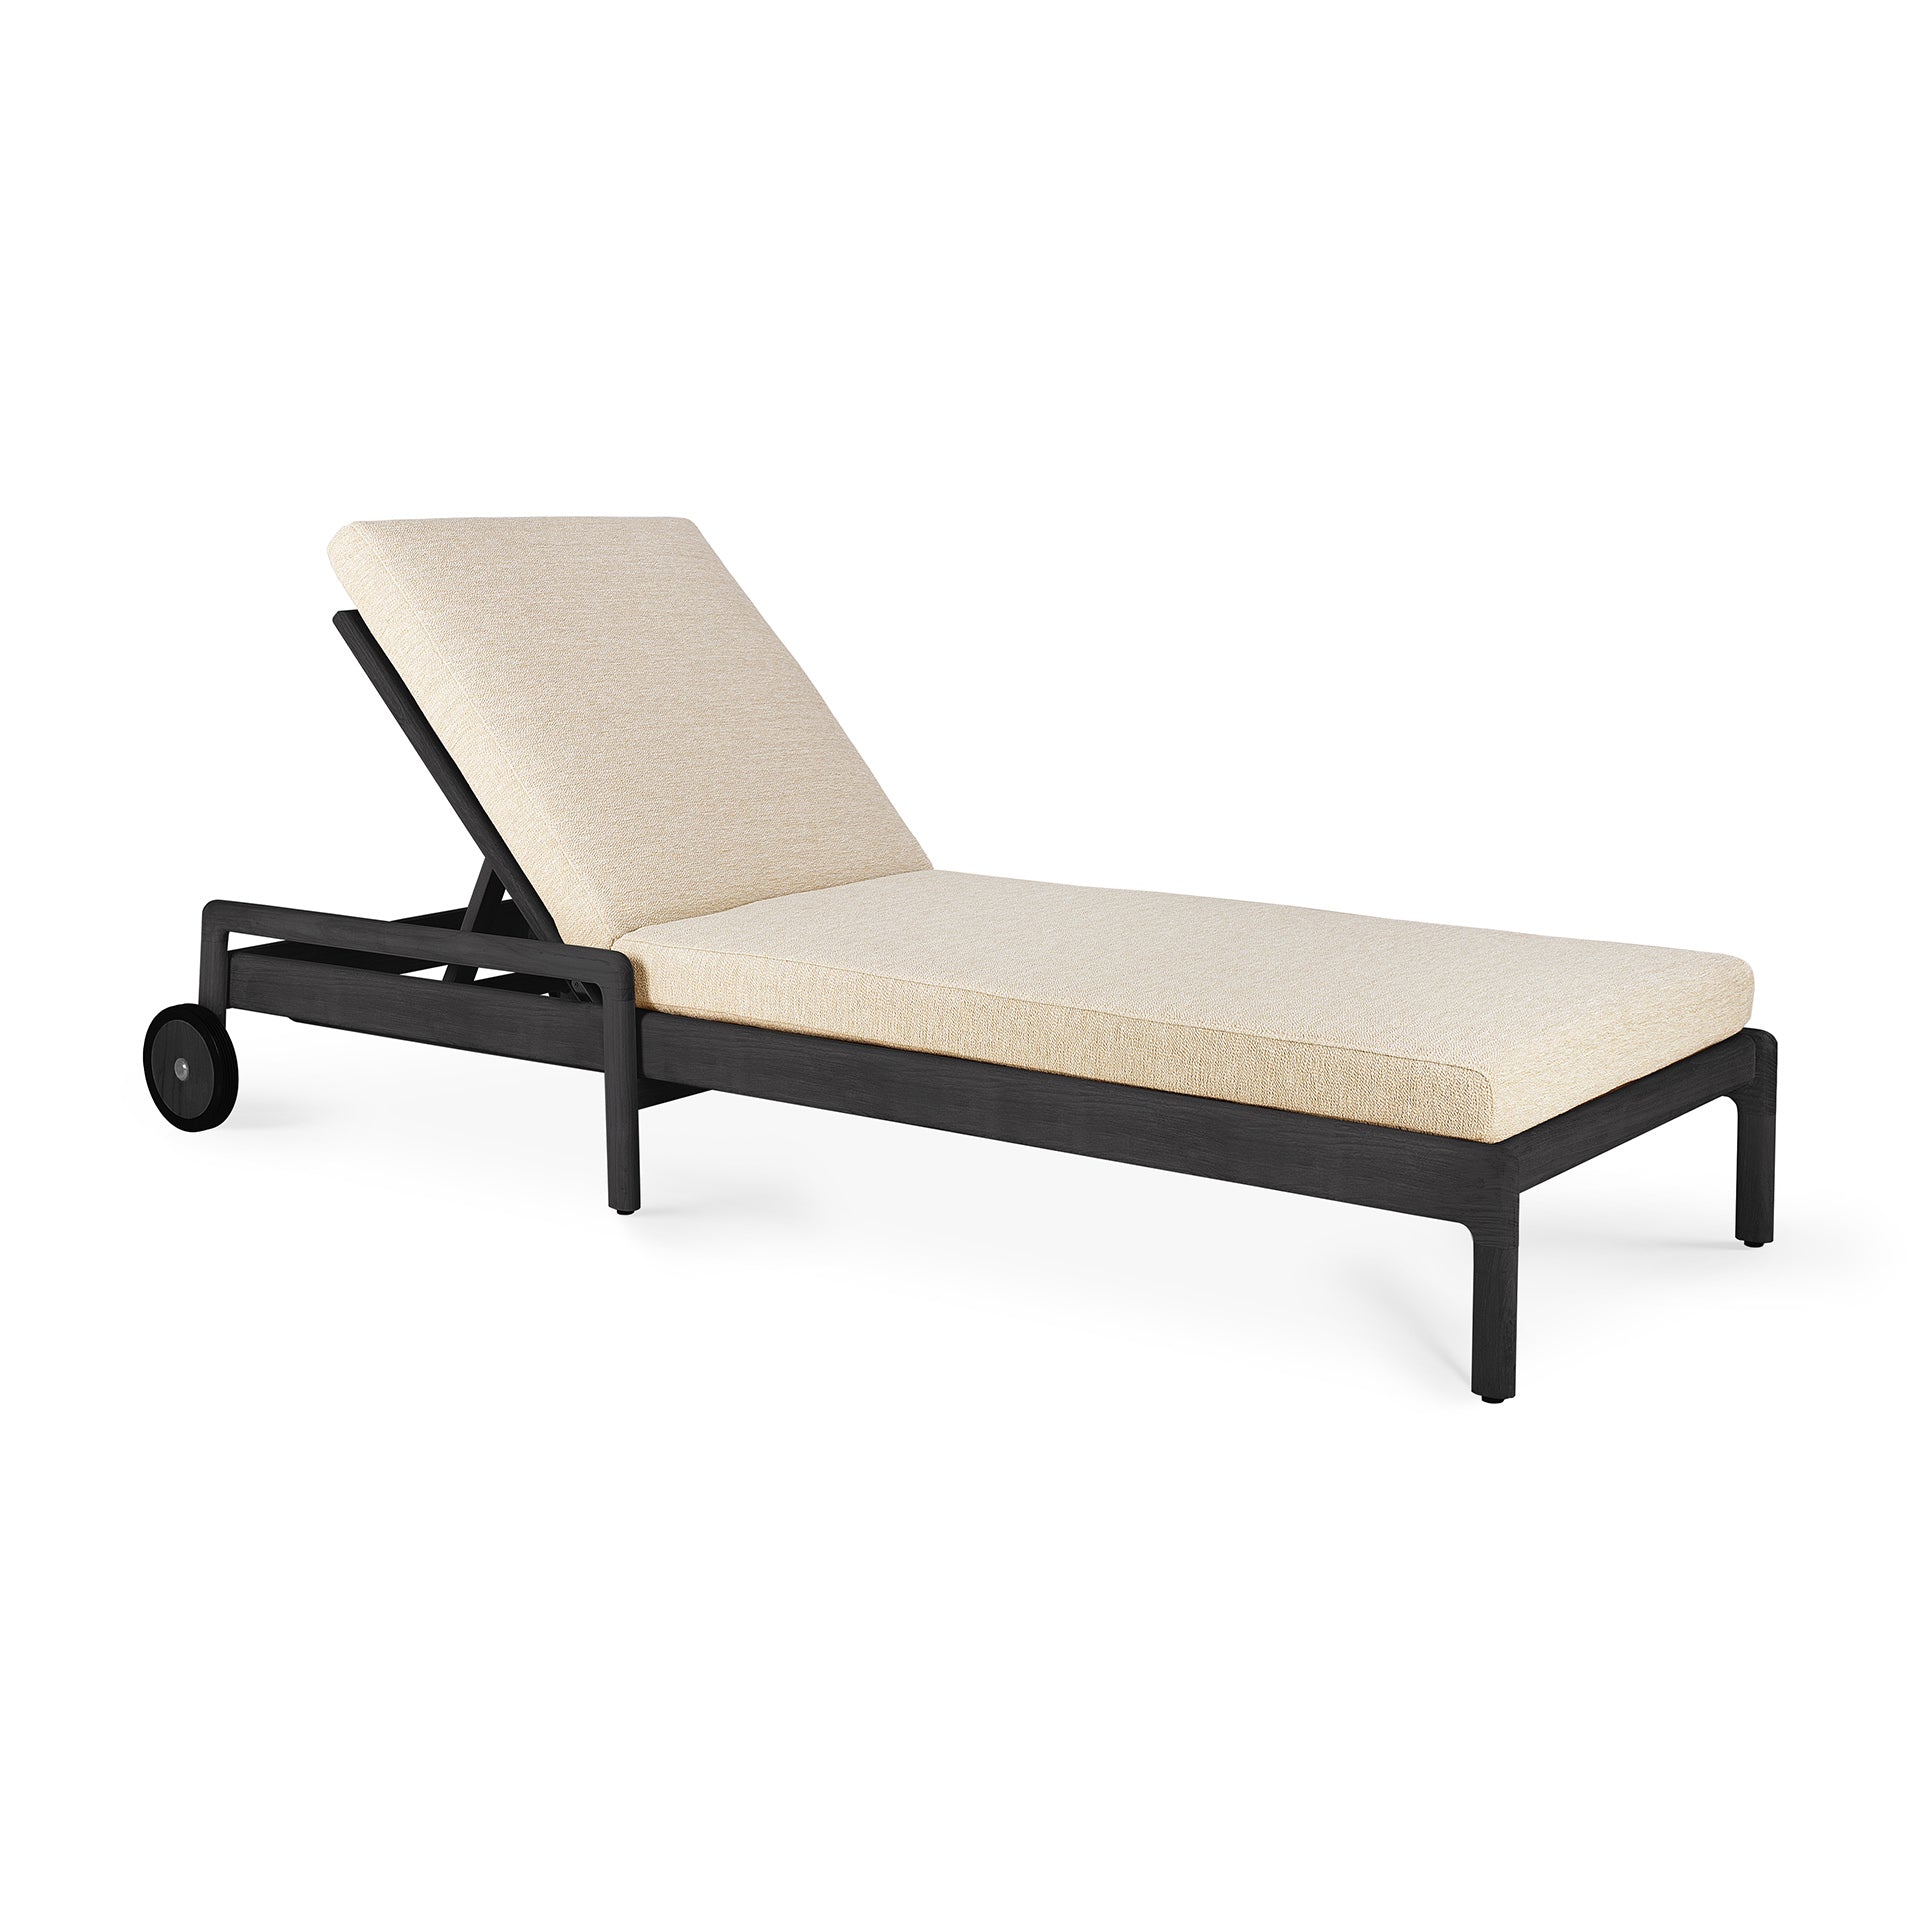 Ethnicraft Jack Outdoor Lounger Cushion Only